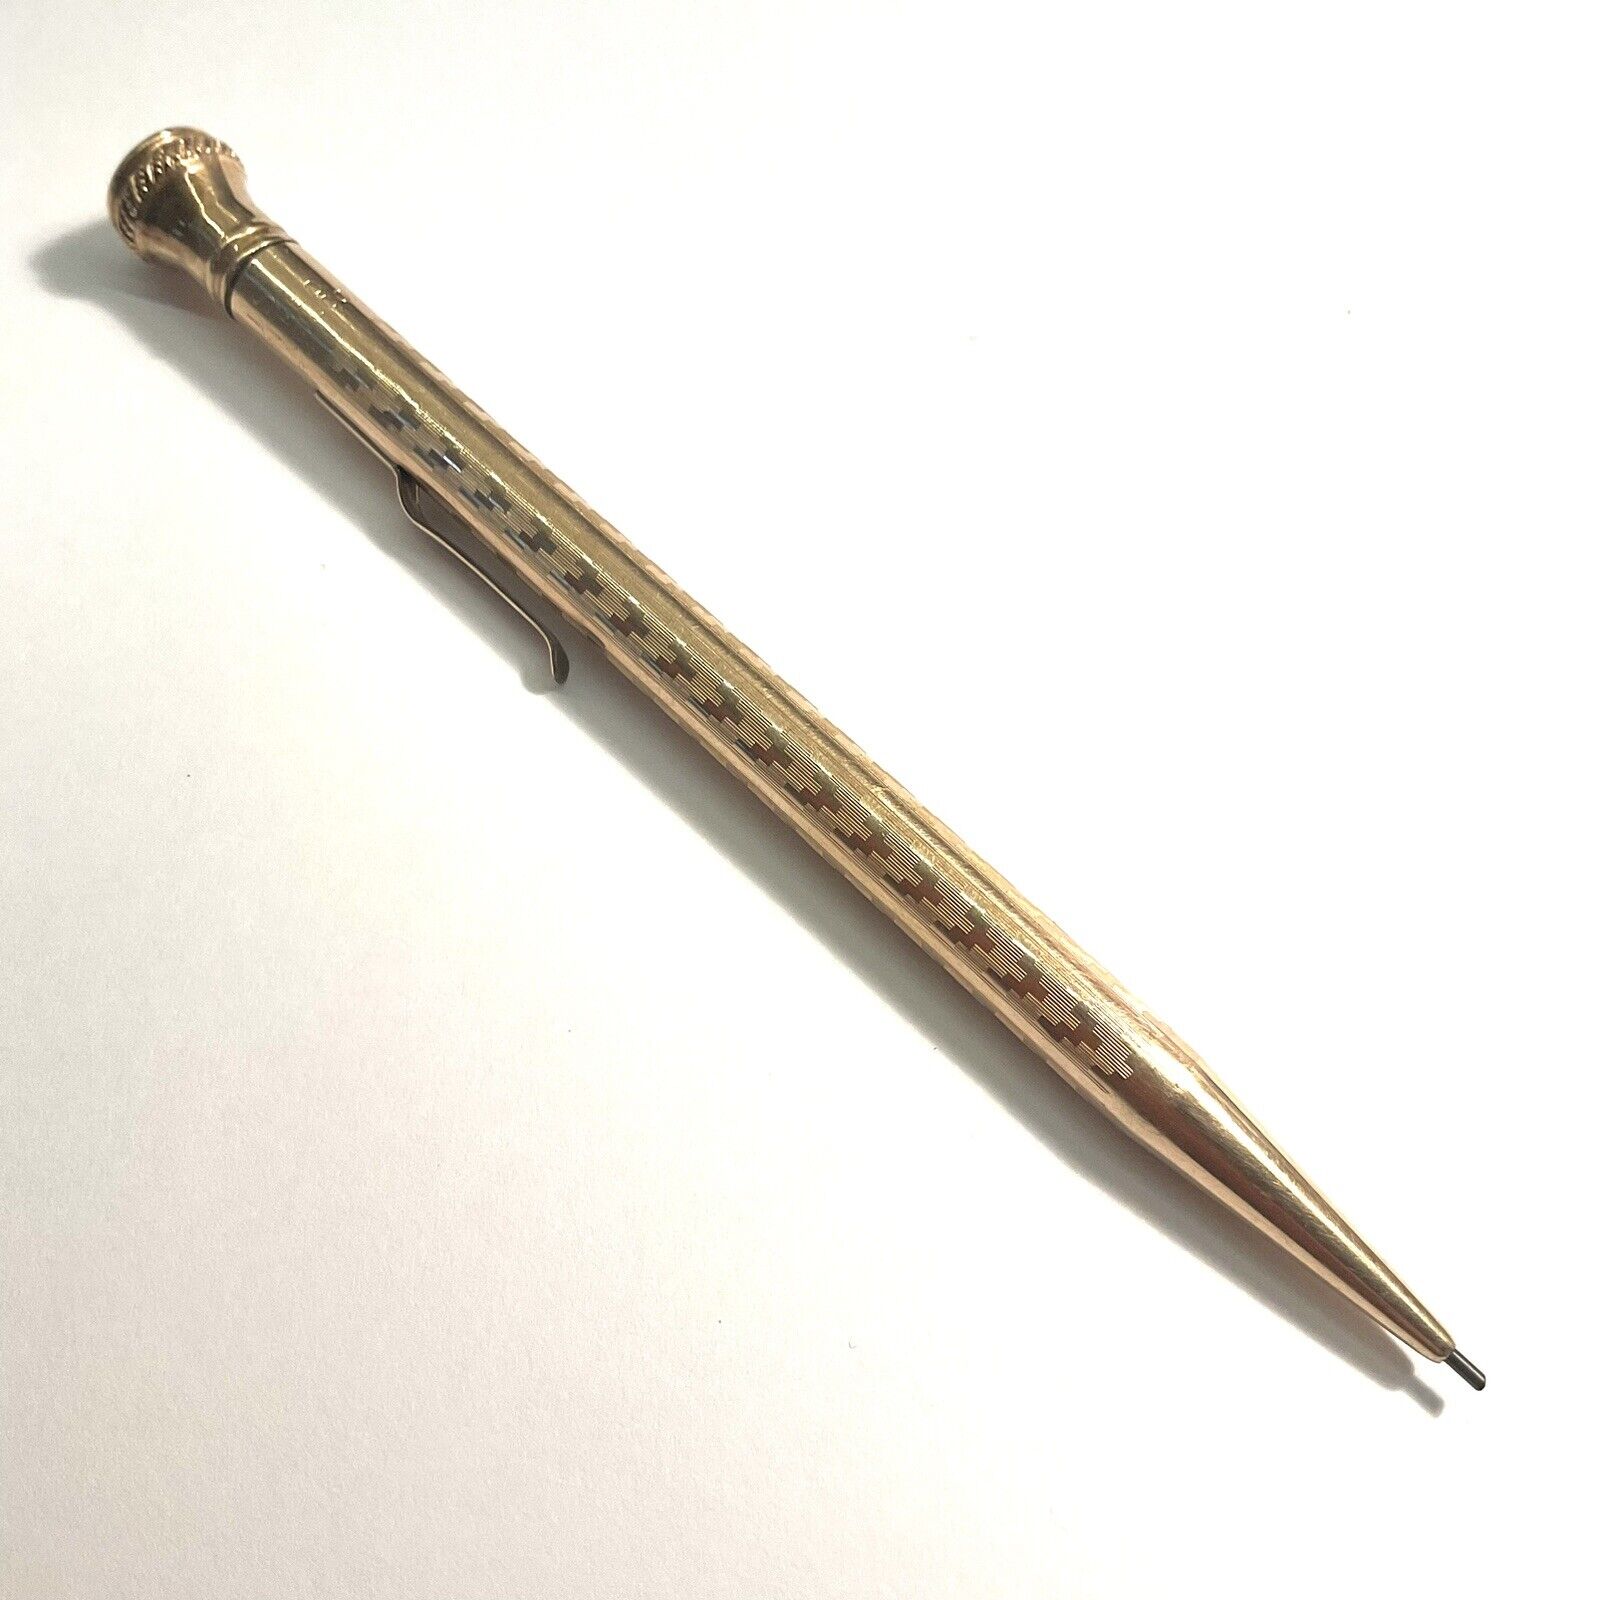 Vintage Venus Ever Pointed American Pencil Co. Gold Filled Mechanical Pencil